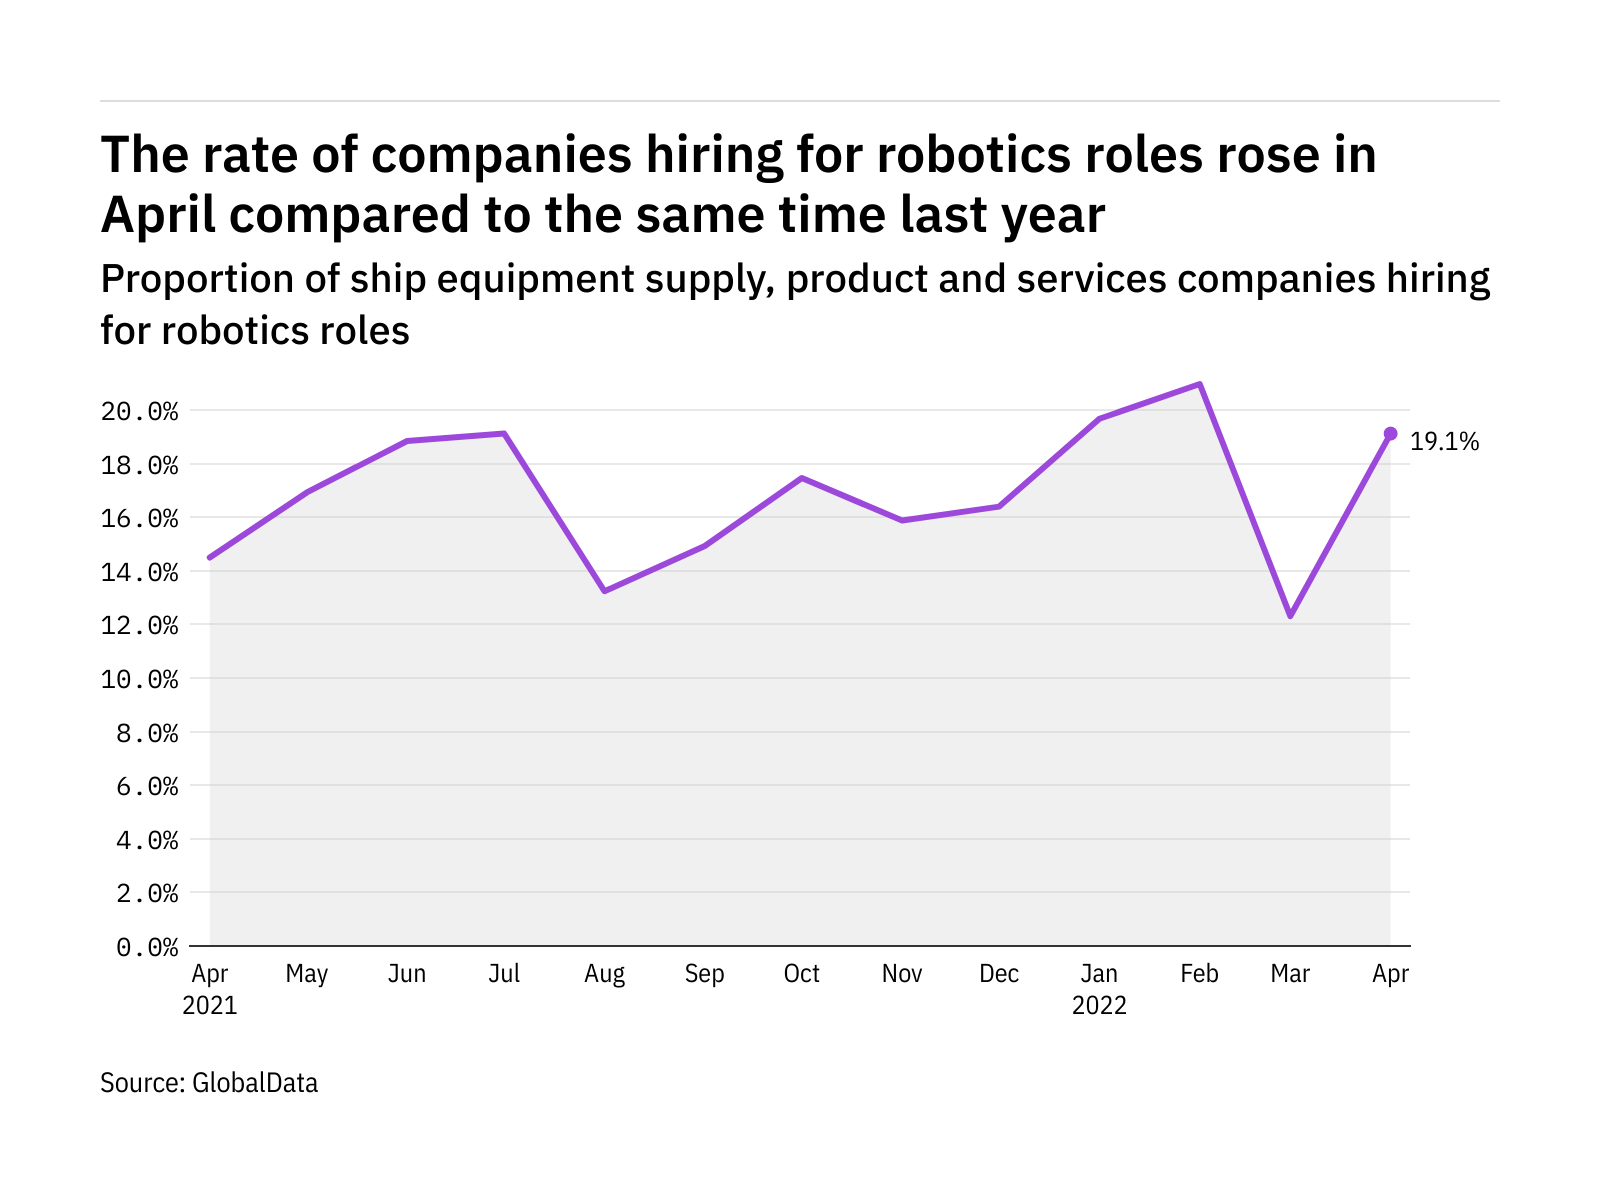 Robotics hiring levels in the ship industry rose in April 2022